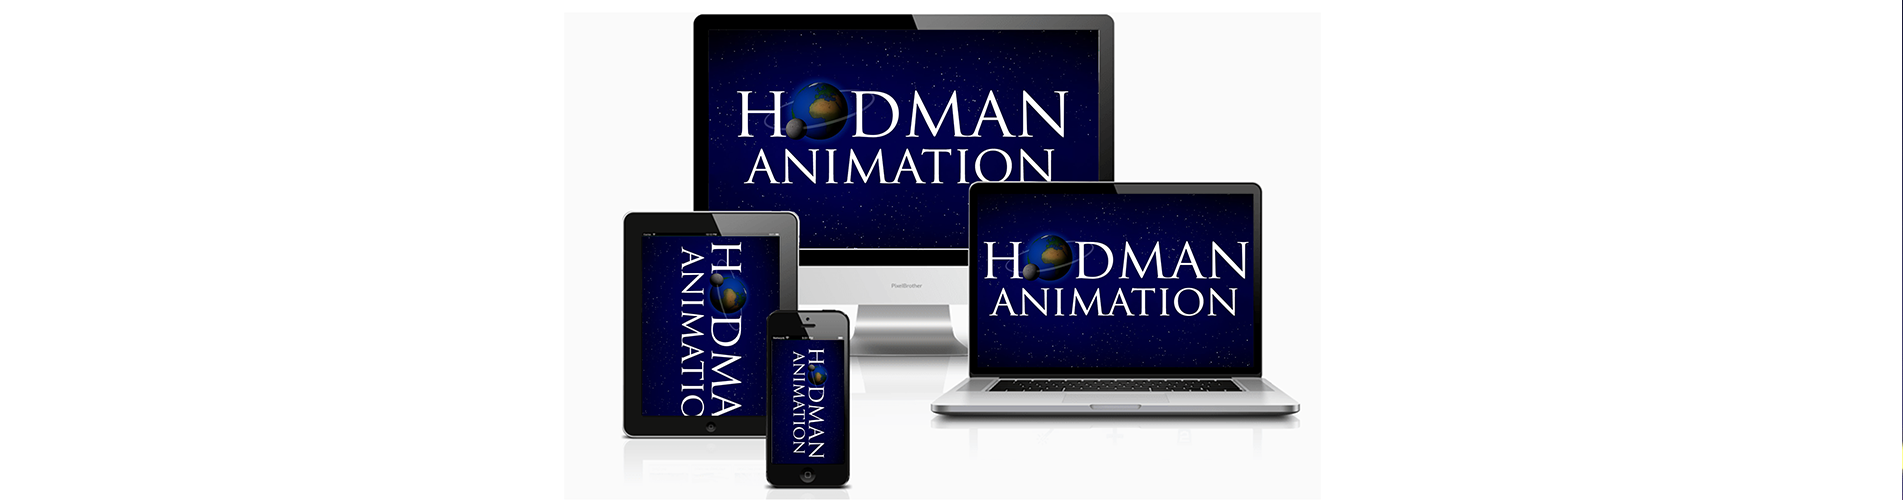 Hodman Animation logo on different devices